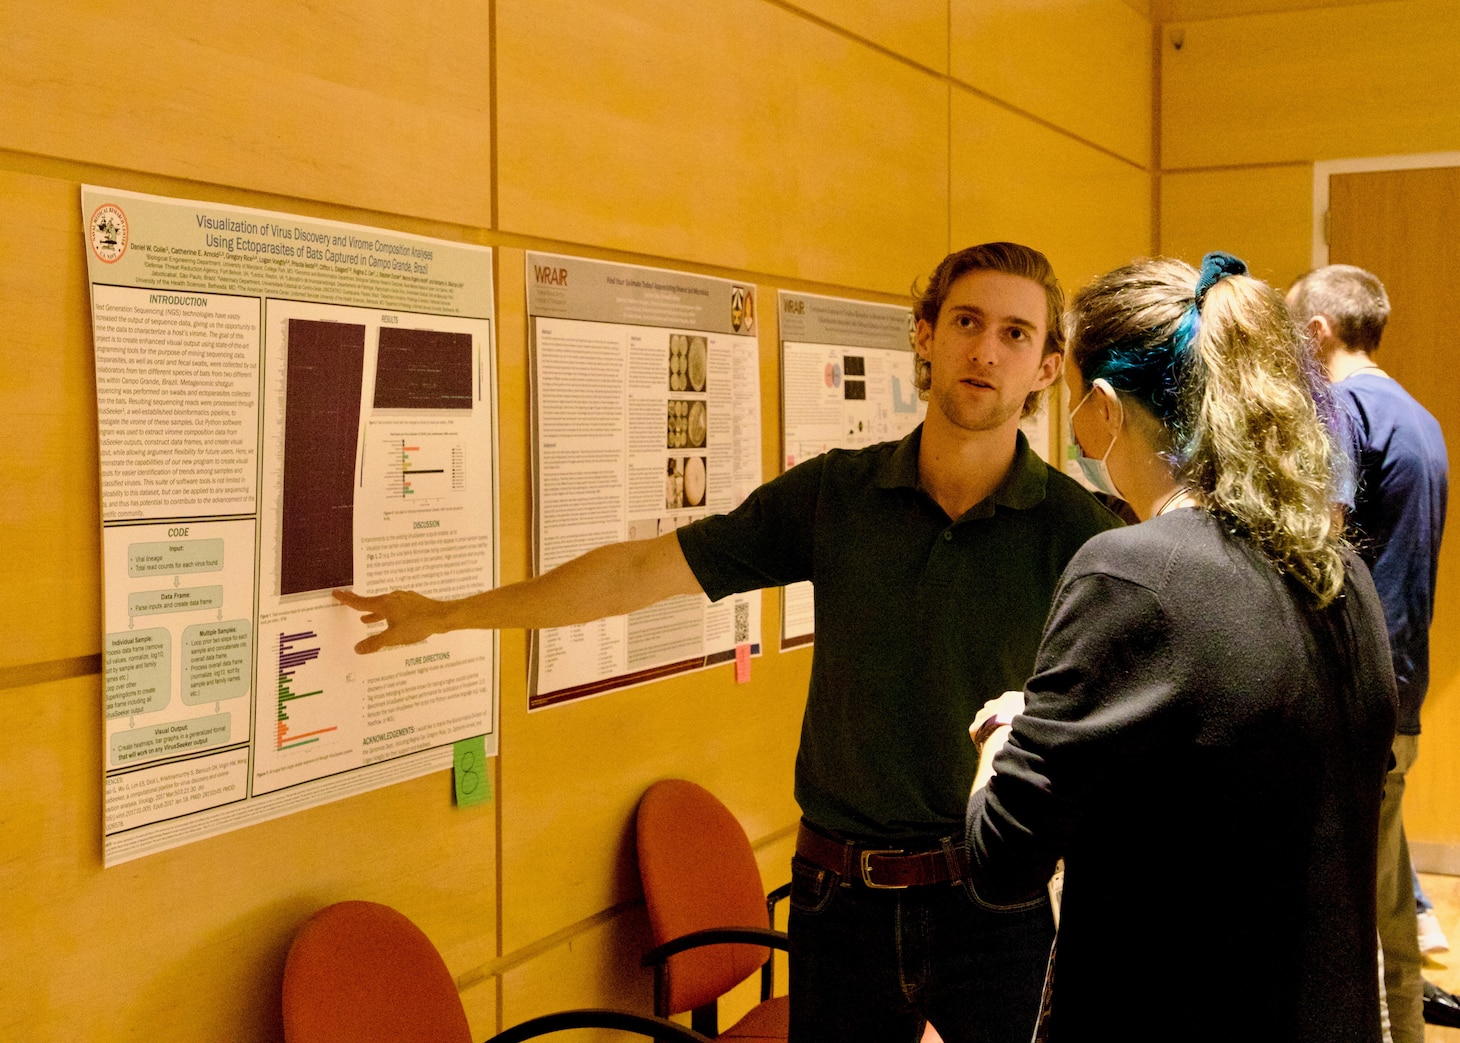 Daniel Coile, an intern with the Naval Research Enterprise Internship Program, explains findings from a research poster to Naval Medical Research Center (NMRC) staff. Interns from NMRC and Walter Reed Army Institute of Research presented on research they participated in at an annual joint STEM Expo poster session, which marked the final day of the summer program. (U.S. Navy photo by Sidney Hinds/Released)